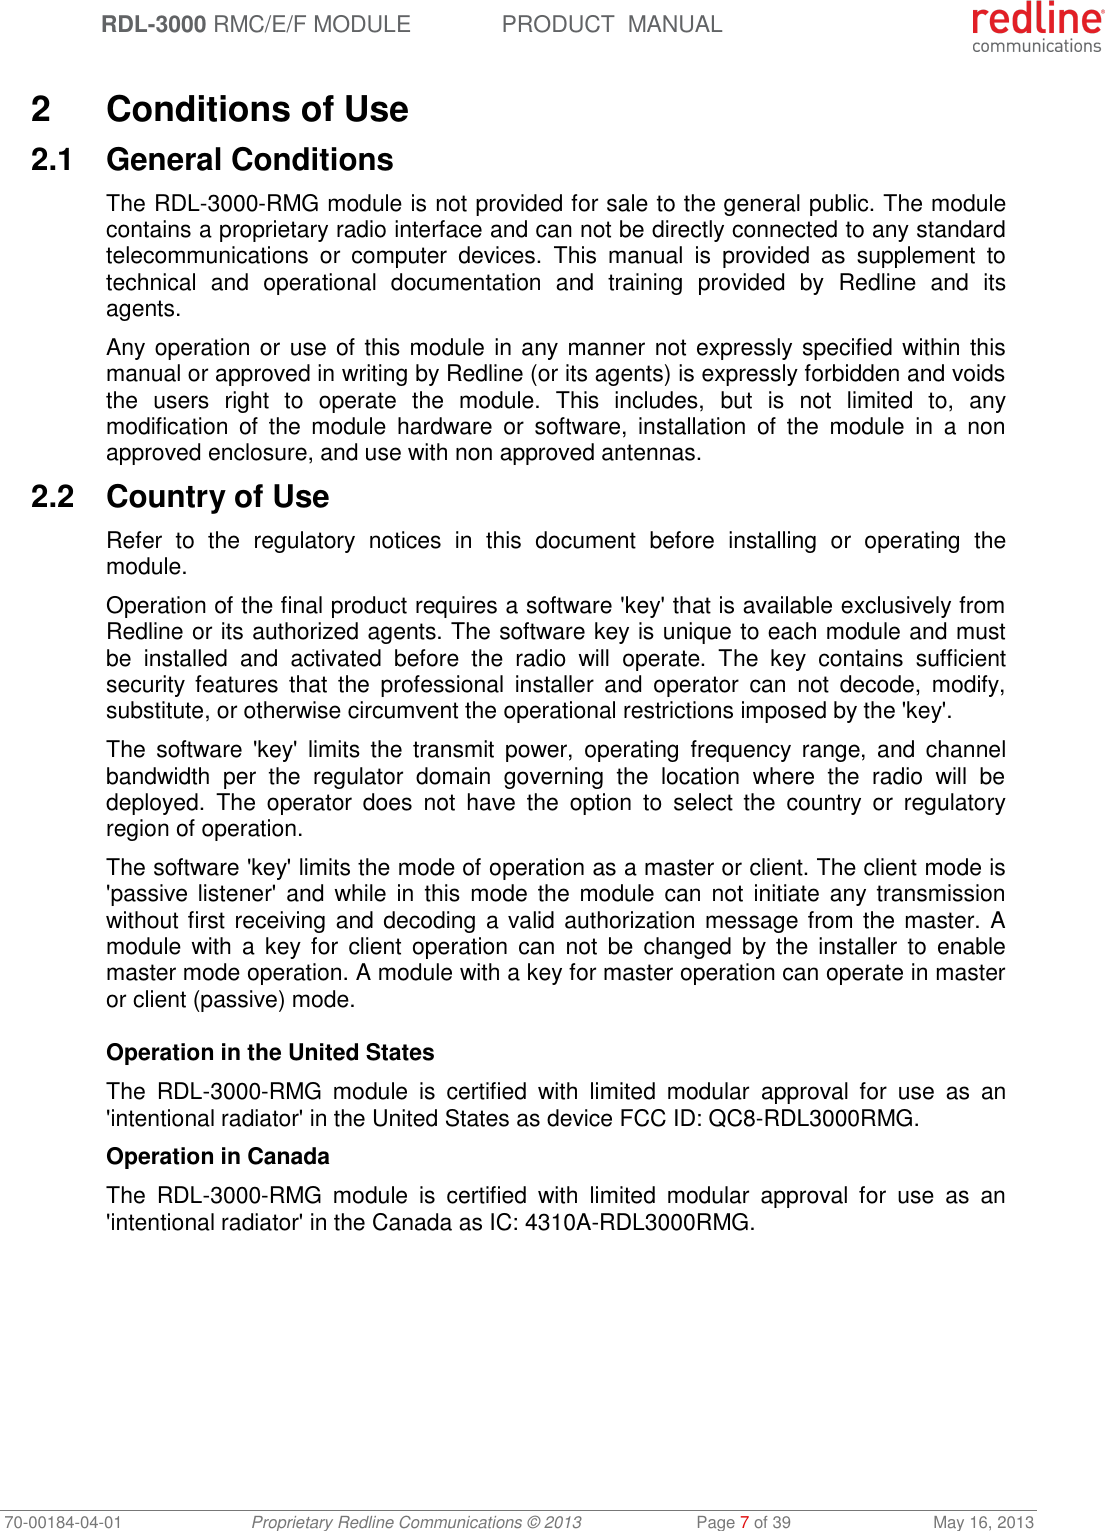  RDL-3000 RMC/E/F MODULE PRODUCT  MANUAL 70-00184-04-01 Proprietary Redline Communications © 2013  Page 7 of 39  May 16, 2013  2  Conditions of Use 2.1  General Conditions The RDL-3000-RMG module is not provided for sale to the general public. The module contains a proprietary radio interface and can not be directly connected to any standard telecommunications  or  computer  devices.  This  manual  is  provided  as  supplement  to technical  and  operational  documentation  and  training  provided  by  Redline  and  its agents.  Any operation or use of this module in any manner not expressly specified within this manual or approved in writing by Redline (or its agents) is expressly forbidden and voids the  users  right  to  operate  the  module.  This  includes,  but  is  not  limited  to,  any modification  of  the  module  hardware  or  software,  installation  of  the  module  in  a  non approved enclosure, and use with non approved antennas. 2.2  Country of Use Refer  to  the  regulatory  notices  in  this  document  before  installing  or  operating  the module.  Operation of the final product requires a software &apos;key&apos; that is available exclusively from Redline or its authorized agents. The software key is unique to each module and must be  installed  and  activated  before  the  radio  will  operate.  The  key  contains  sufficient security  features  that  the  professional  installer  and  operator  can  not  decode,  modify, substitute, or otherwise circumvent the operational restrictions imposed by the &apos;key&apos;. The  software  &apos;key&apos;  limits  the  transmit  power,  operating  frequency  range,  and  channel bandwidth  per  the  regulator  domain  governing  the  location  where  the  radio  will  be deployed.  The  operator  does  not  have  the  option  to  select  the  country  or  regulatory region of operation. The software &apos;key&apos; limits the mode of operation as a master or client. The client mode is &apos;passive listener&apos;  and  while in this  mode the module can not  initiate  any  transmission without first receiving and decoding a valid authorization message from the master. A module  with  a  key  for  client  operation  can  not  be  changed  by the installer  to  enable master mode operation. A module with a key for master operation can operate in master or client (passive) mode.   Operation in the United States The  RDL-3000-RMG  module  is  certified  with  limited  modular  approval  for  use  as  an &apos;intentional radiator&apos; in the United States as device FCC ID: QC8-RDL3000RMG. Operation in Canada The  RDL-3000-RMG  module  is  certified  with  limited  modular  approval  for  use  as  an &apos;intentional radiator&apos; in the Canada as IC: 4310A-RDL3000RMG.   